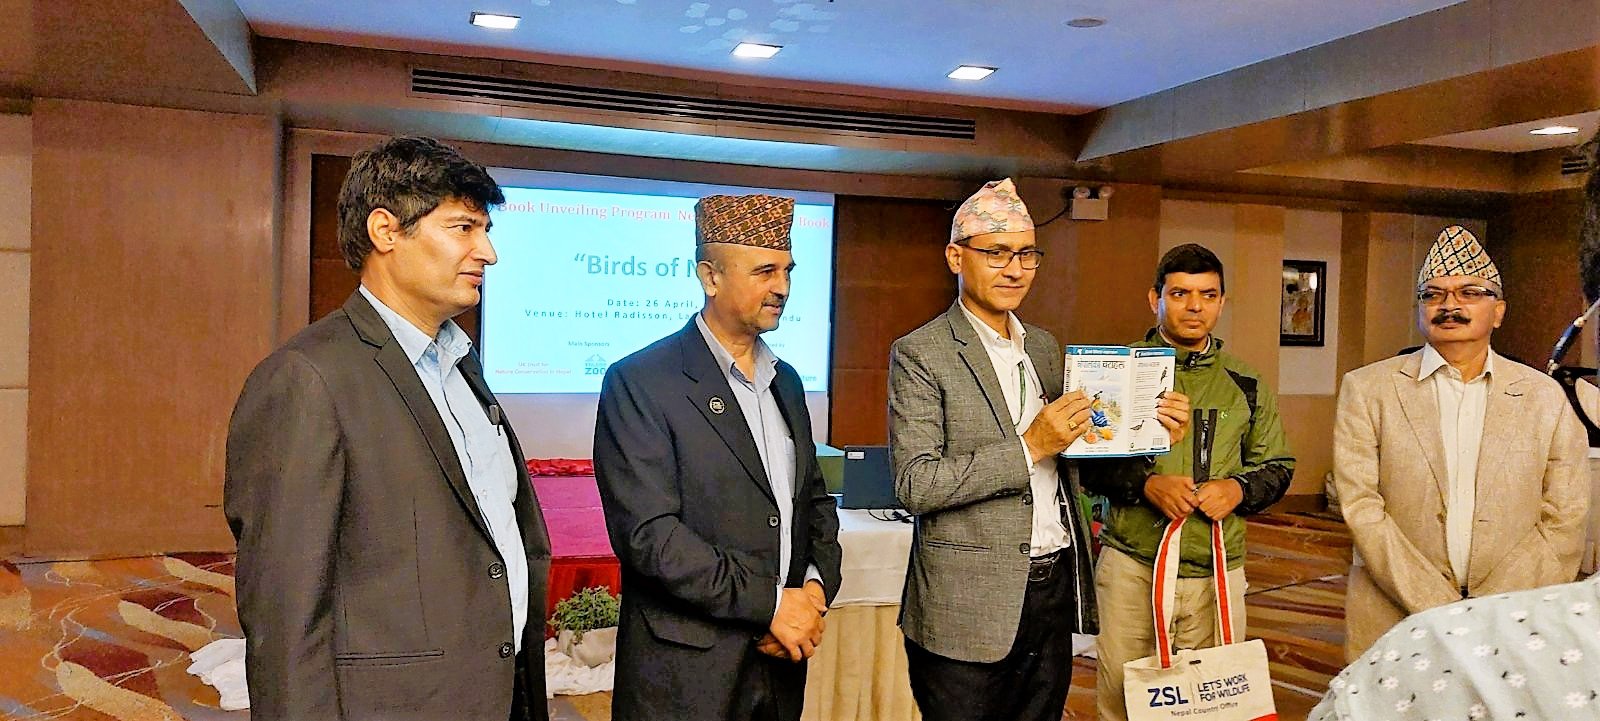 Chief Guest Dr. Ram Chandra Kandel; Director General of Department of National Parks and Wildlife Conservation (DNPWC) unveiling the "Birds of Nepal; a field guide to the birds of Nepal"